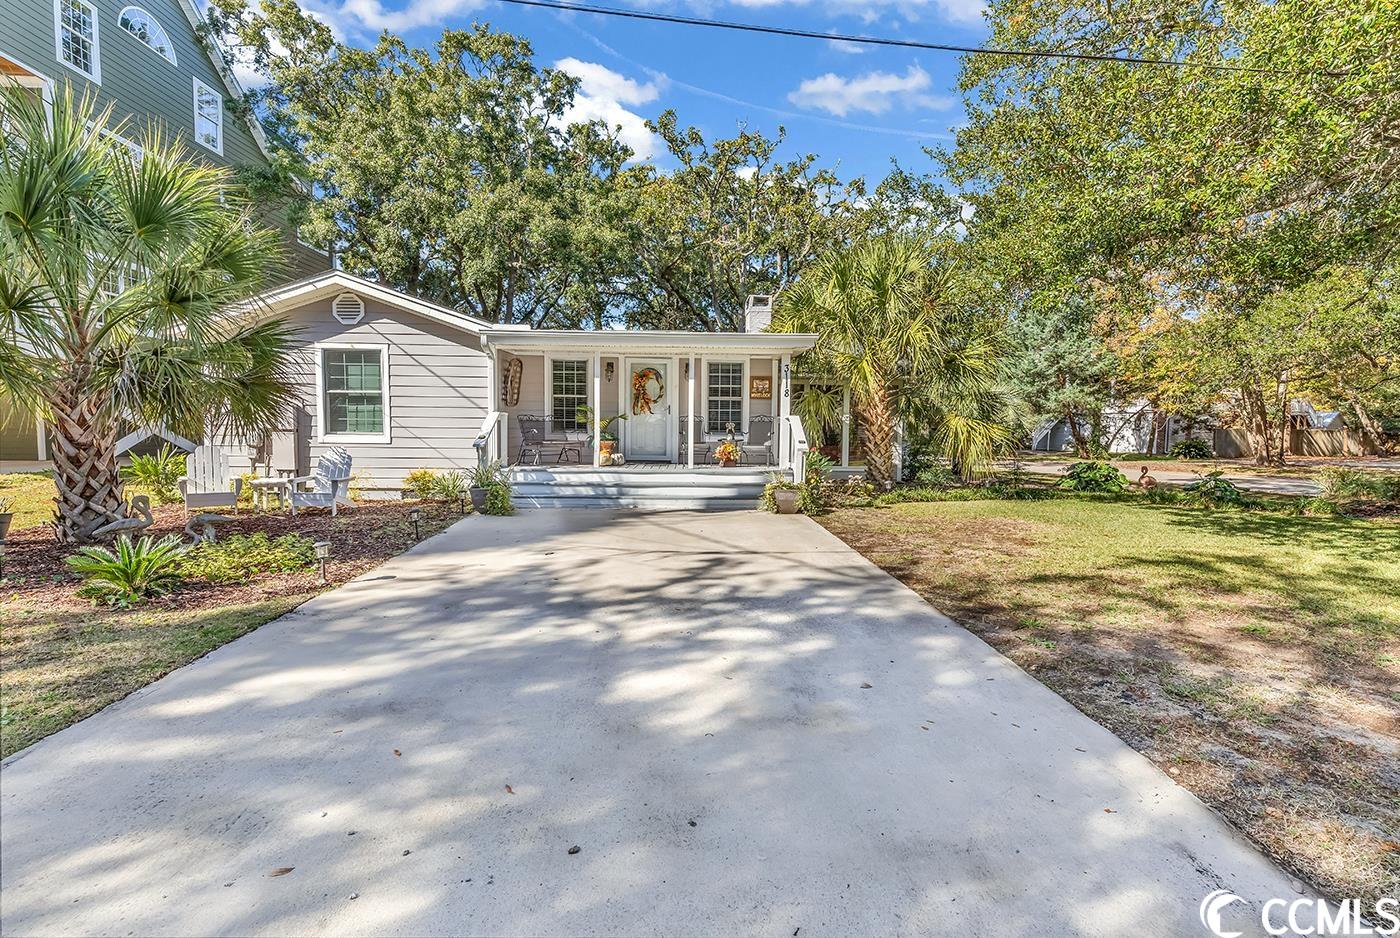 3118 1st Ave. S Murrells Inlet, SC 29576